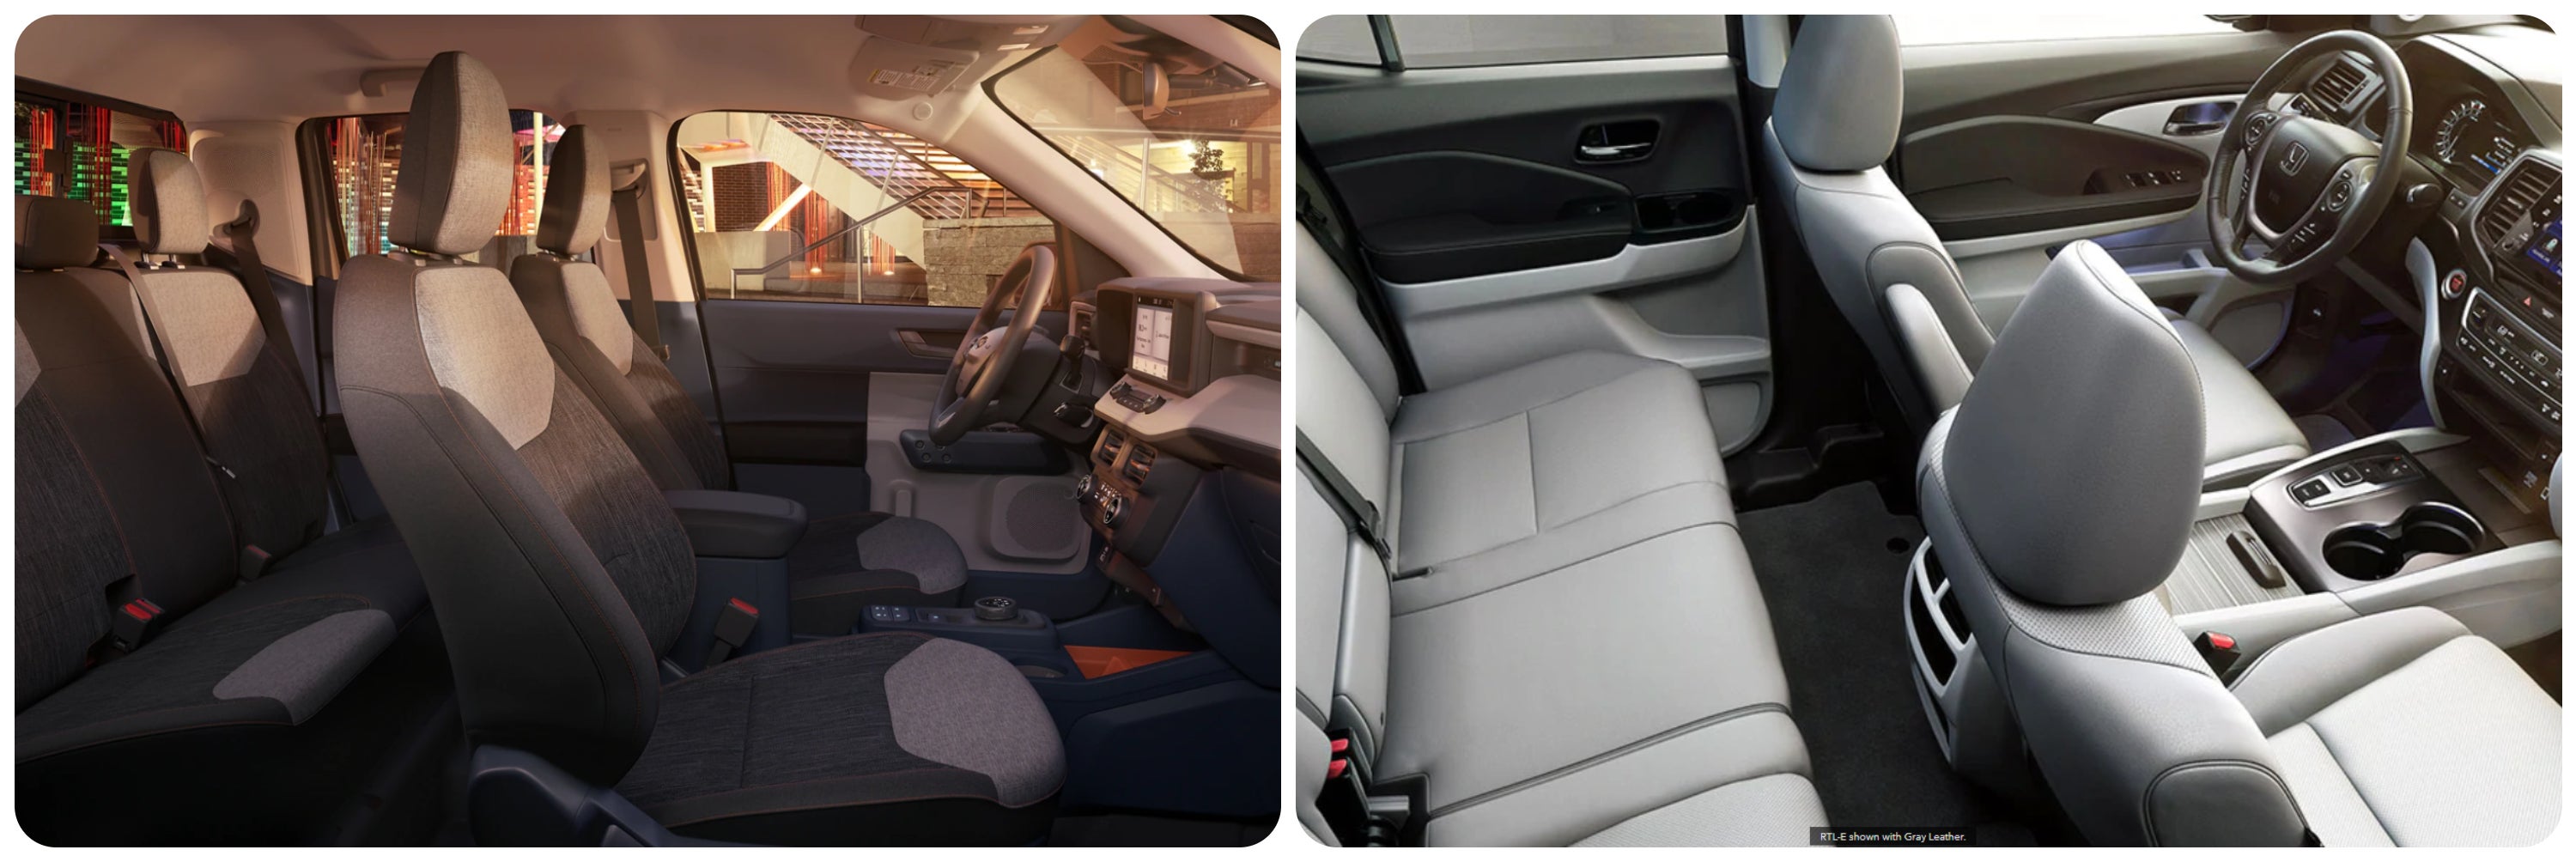 On the left a view of the interior cabin of a 2022 Ford Maverick. On the right, a view of the interior cabin of a 2022 Honda Ridgeline